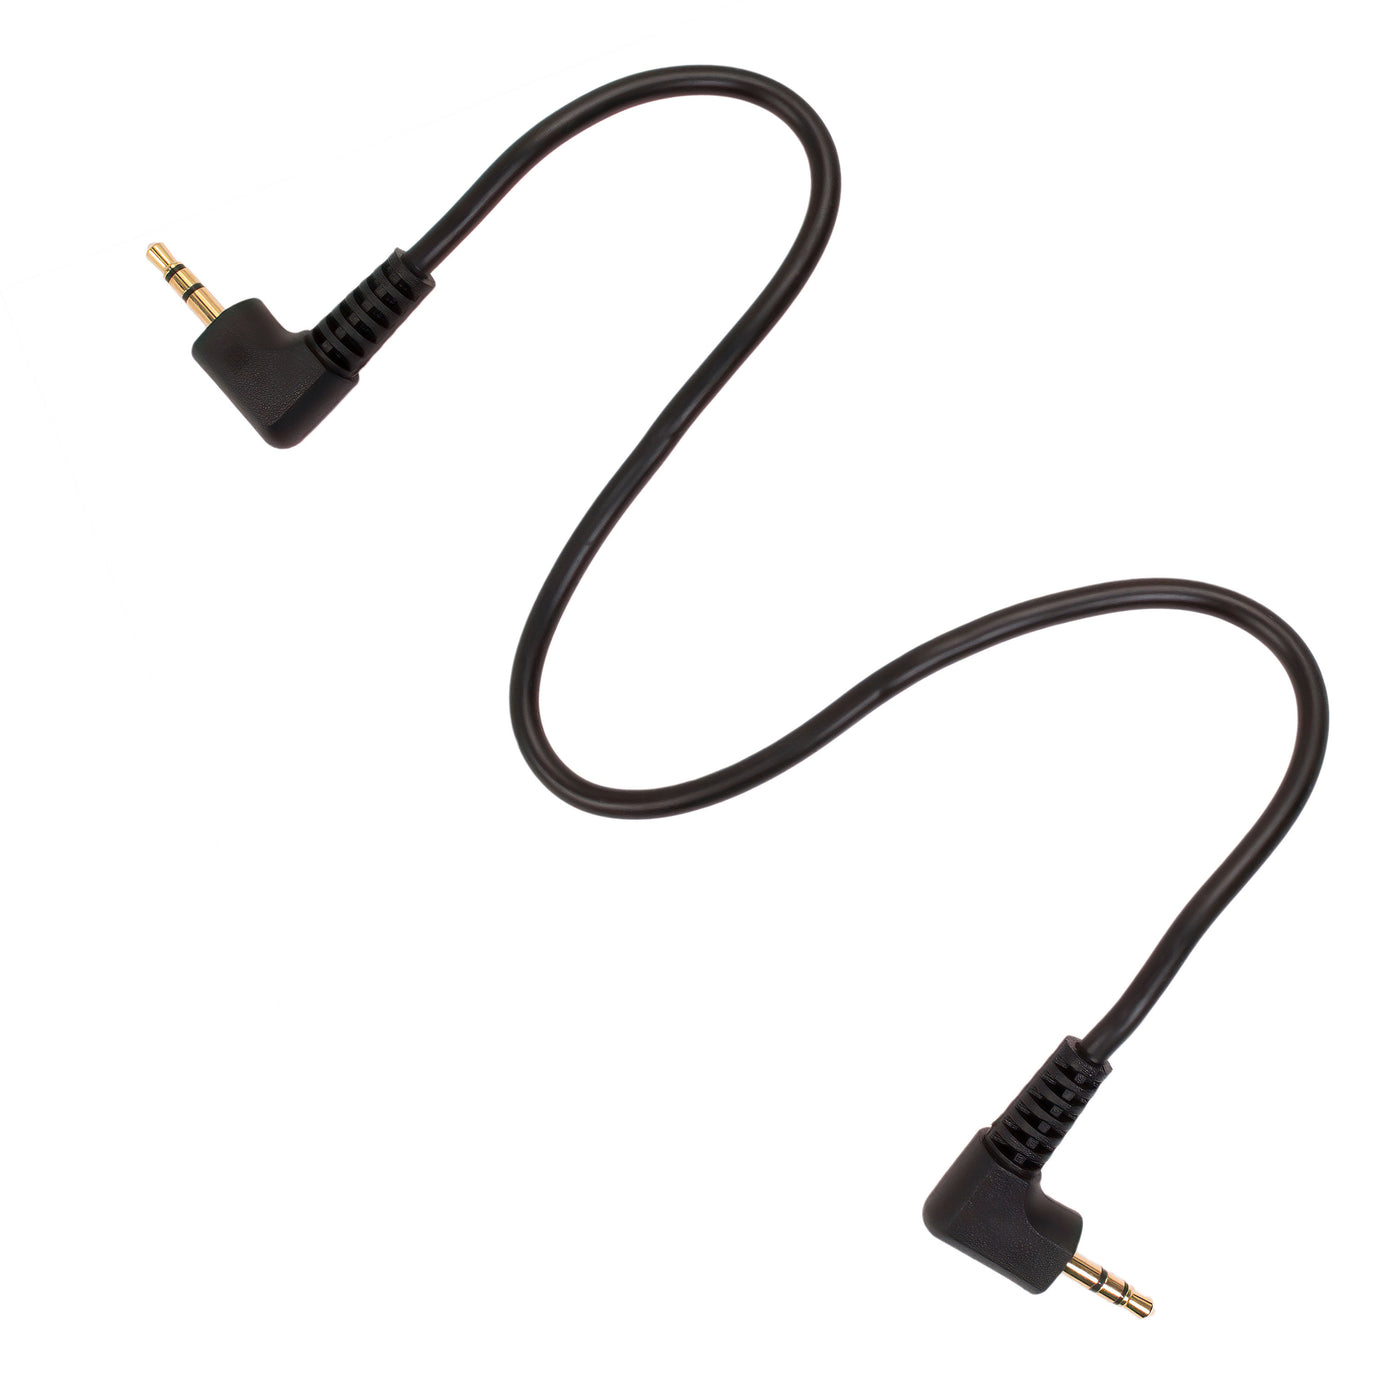 2.5mm to 2.5mm LANC Remote Trigger Shutter Cable